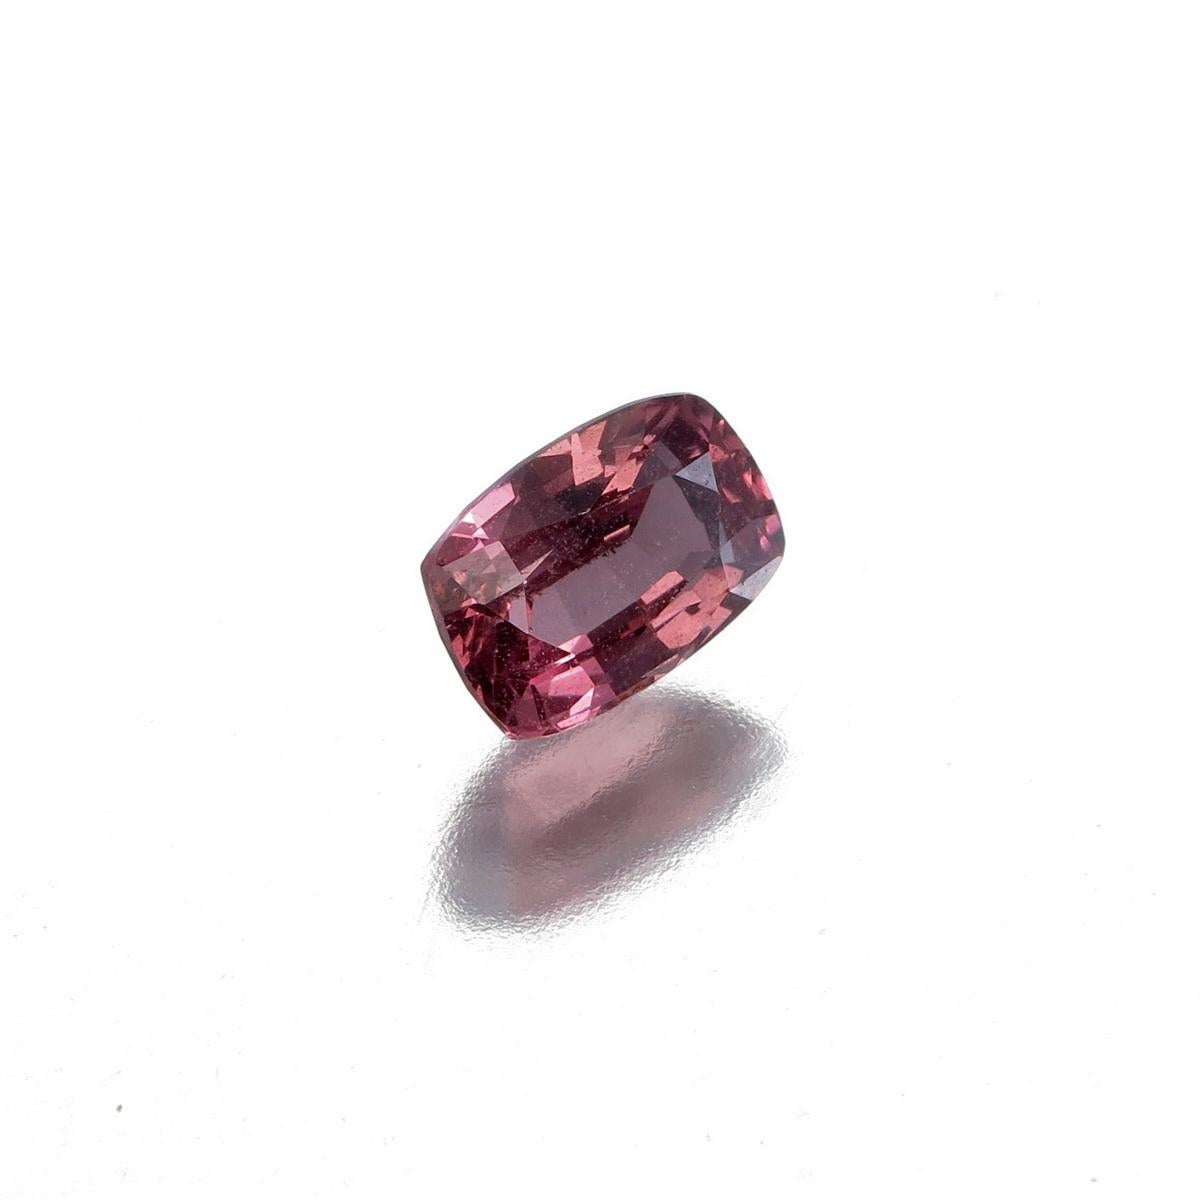 Cushion Cut 1.48 Carat Natural Pink Spinel from Burma For Sale